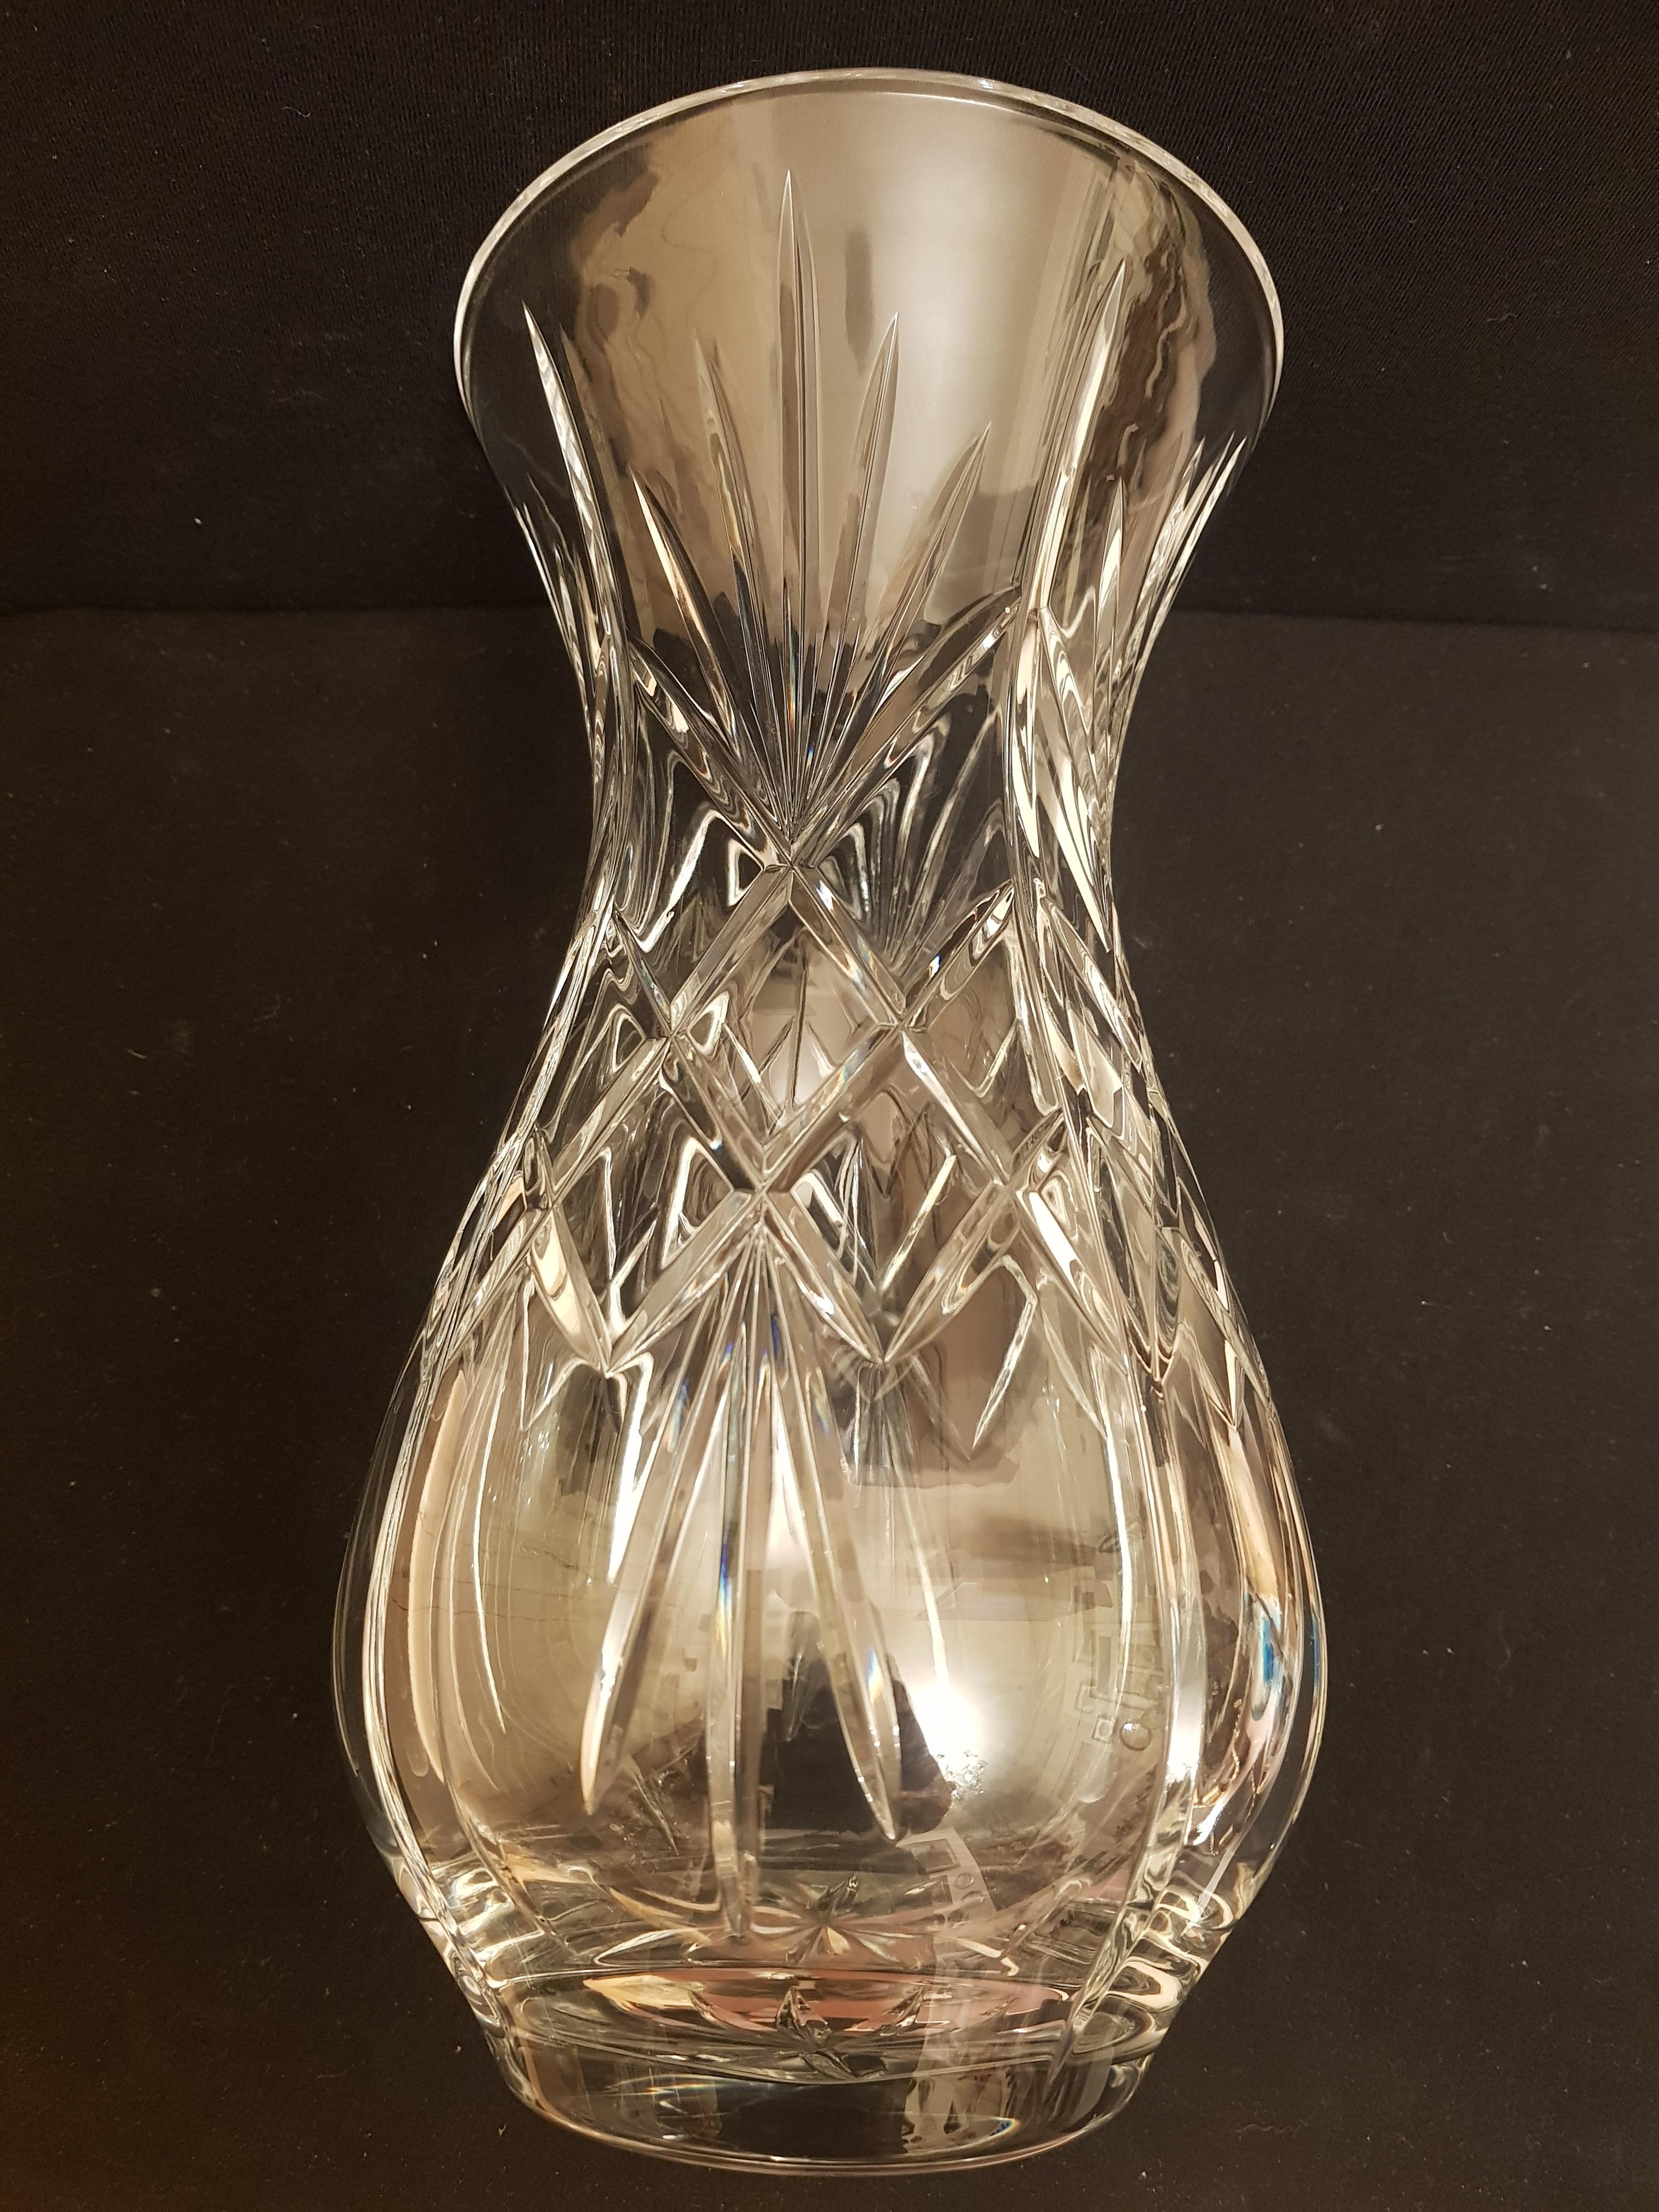 Vitange Large Italian Crystal Vase In Excellent Condition For Sale In Grantham, GB